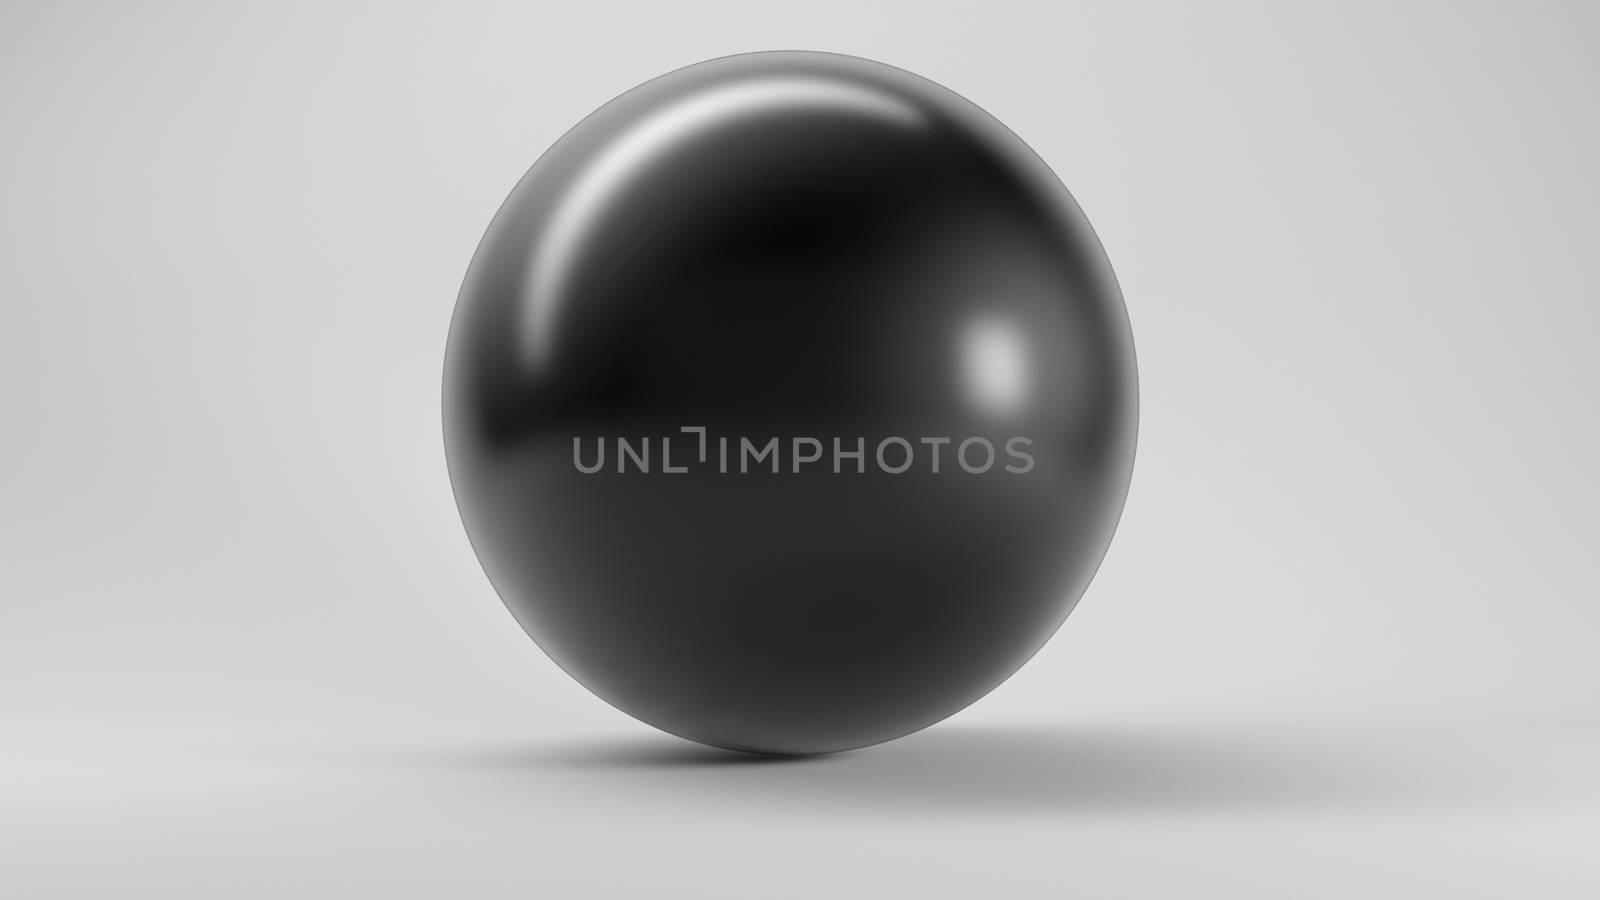 Big black glass sphere with transparent glares and highlights on white background. Black pearlgradients, effects. Abstract texture for your design and business